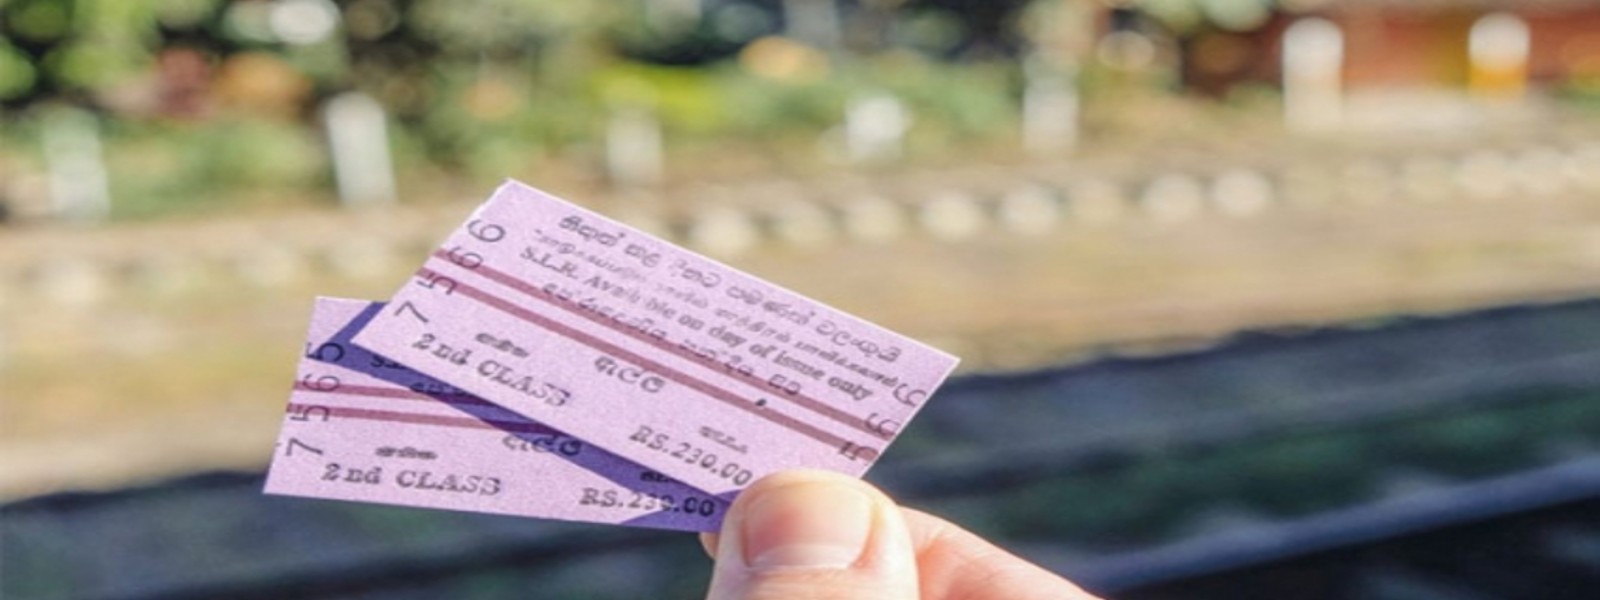 Railways to launch spot checks for tickets